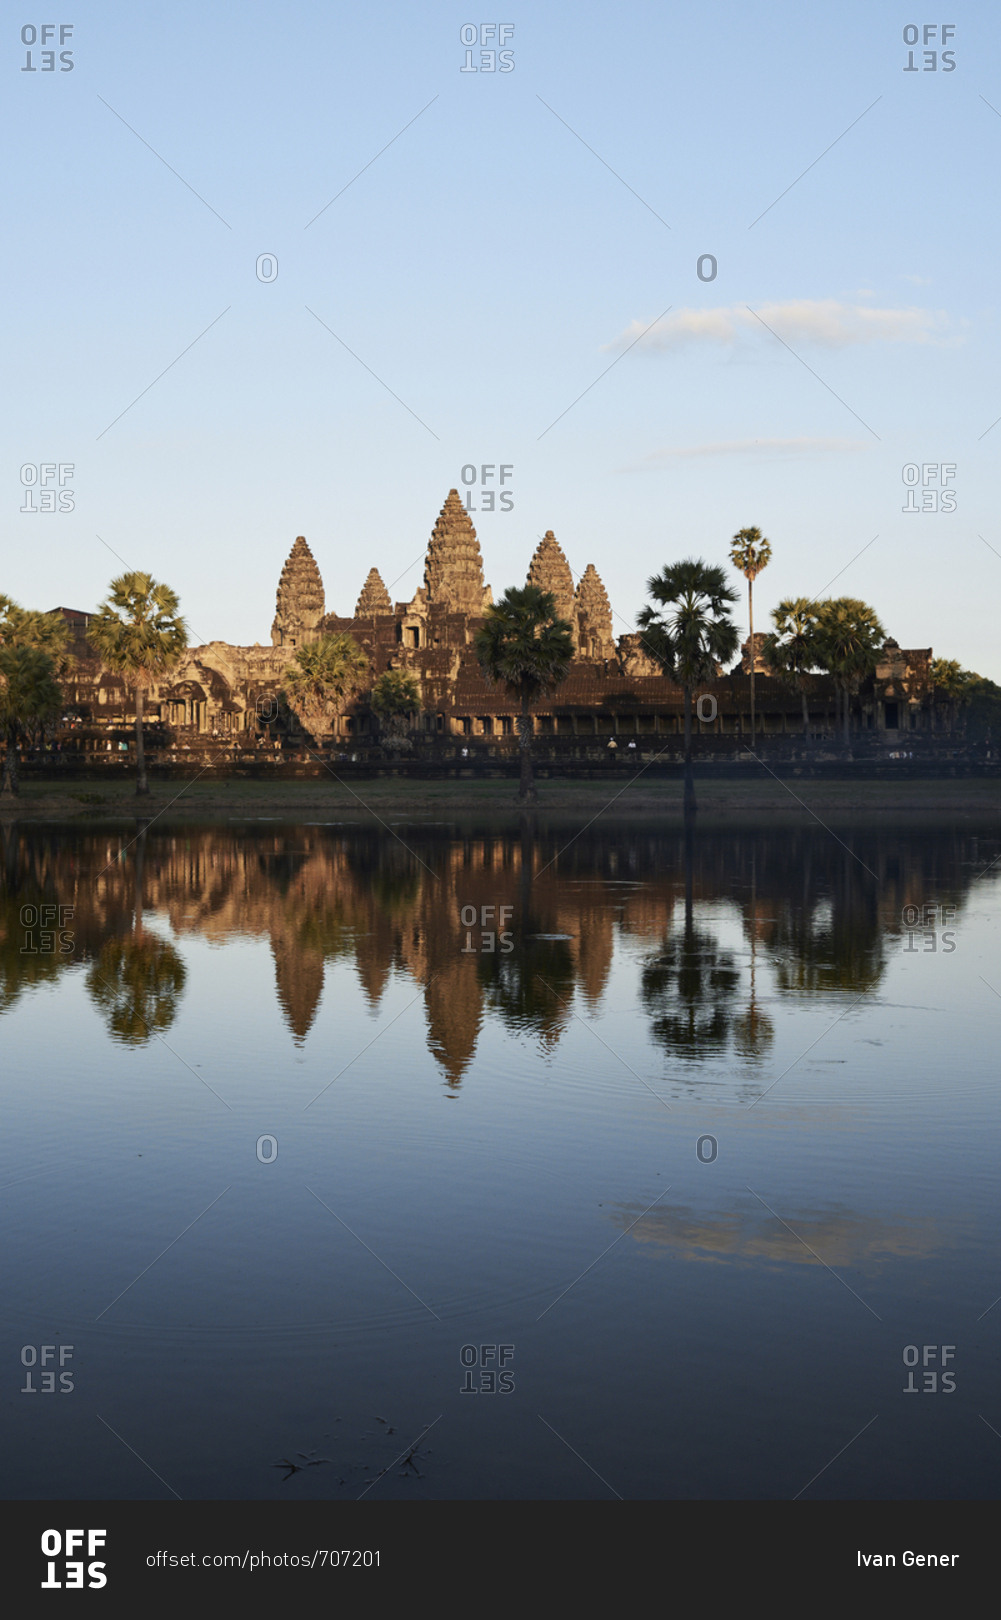 Cambodian landmark Angkor Wat temple with reflection in water at sunset, Siem Reap, Cambodia